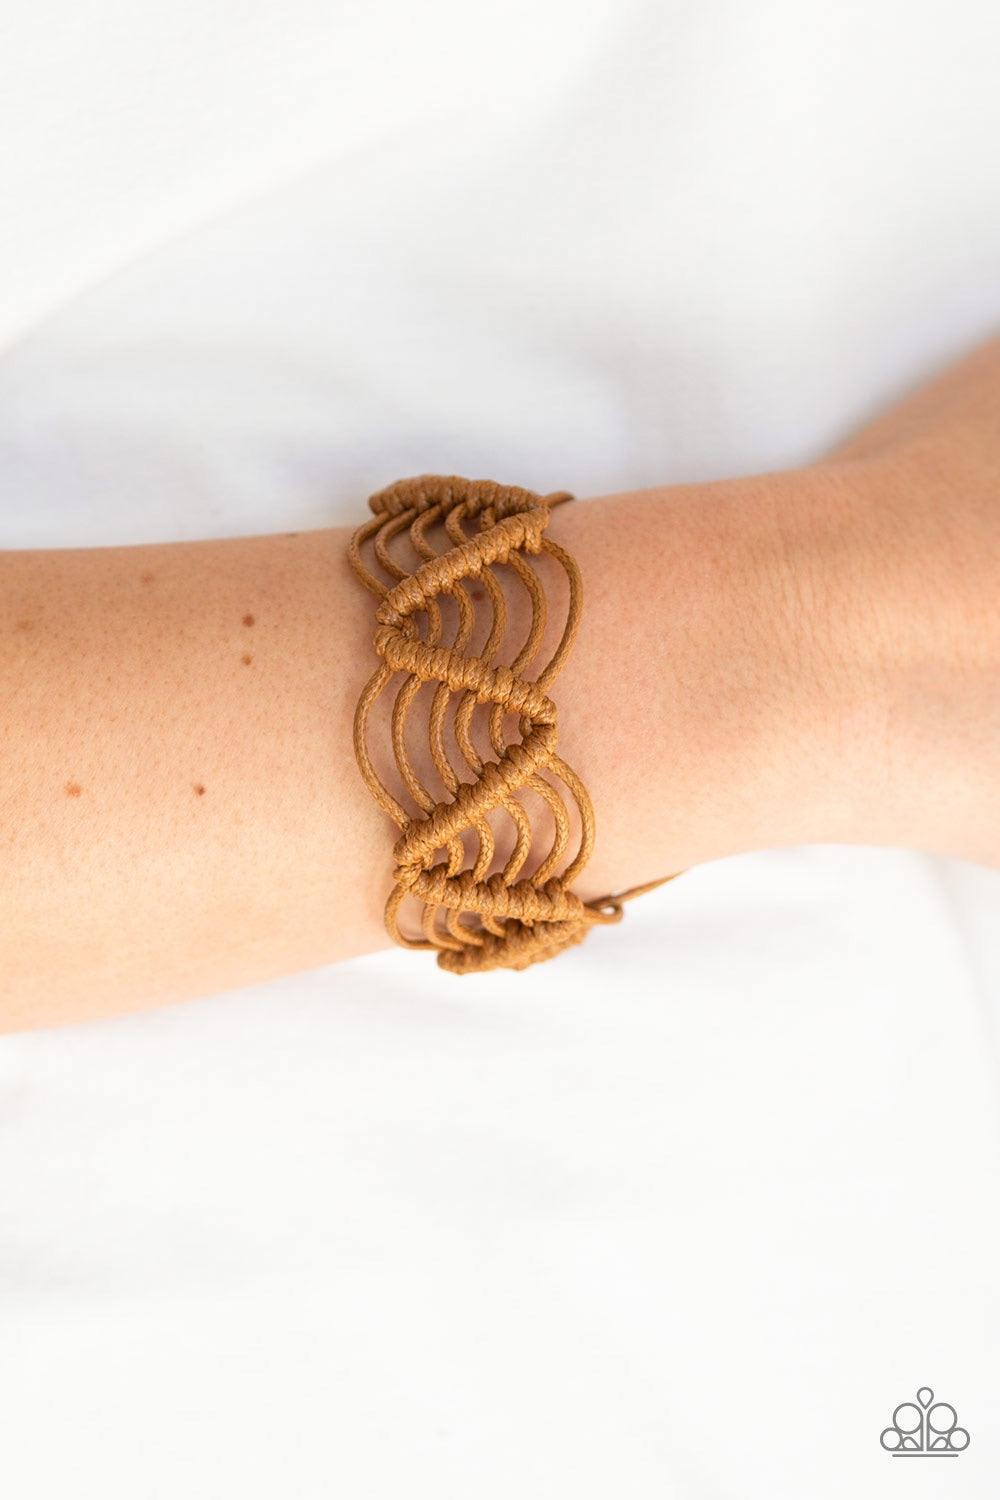 Paparazzi Accessories Rise to the Bait - Brown Brown twine knots around shiny brown cording, creating a netted pattern around the wrist. Features an adjustable sliding knot closure. Jewelry